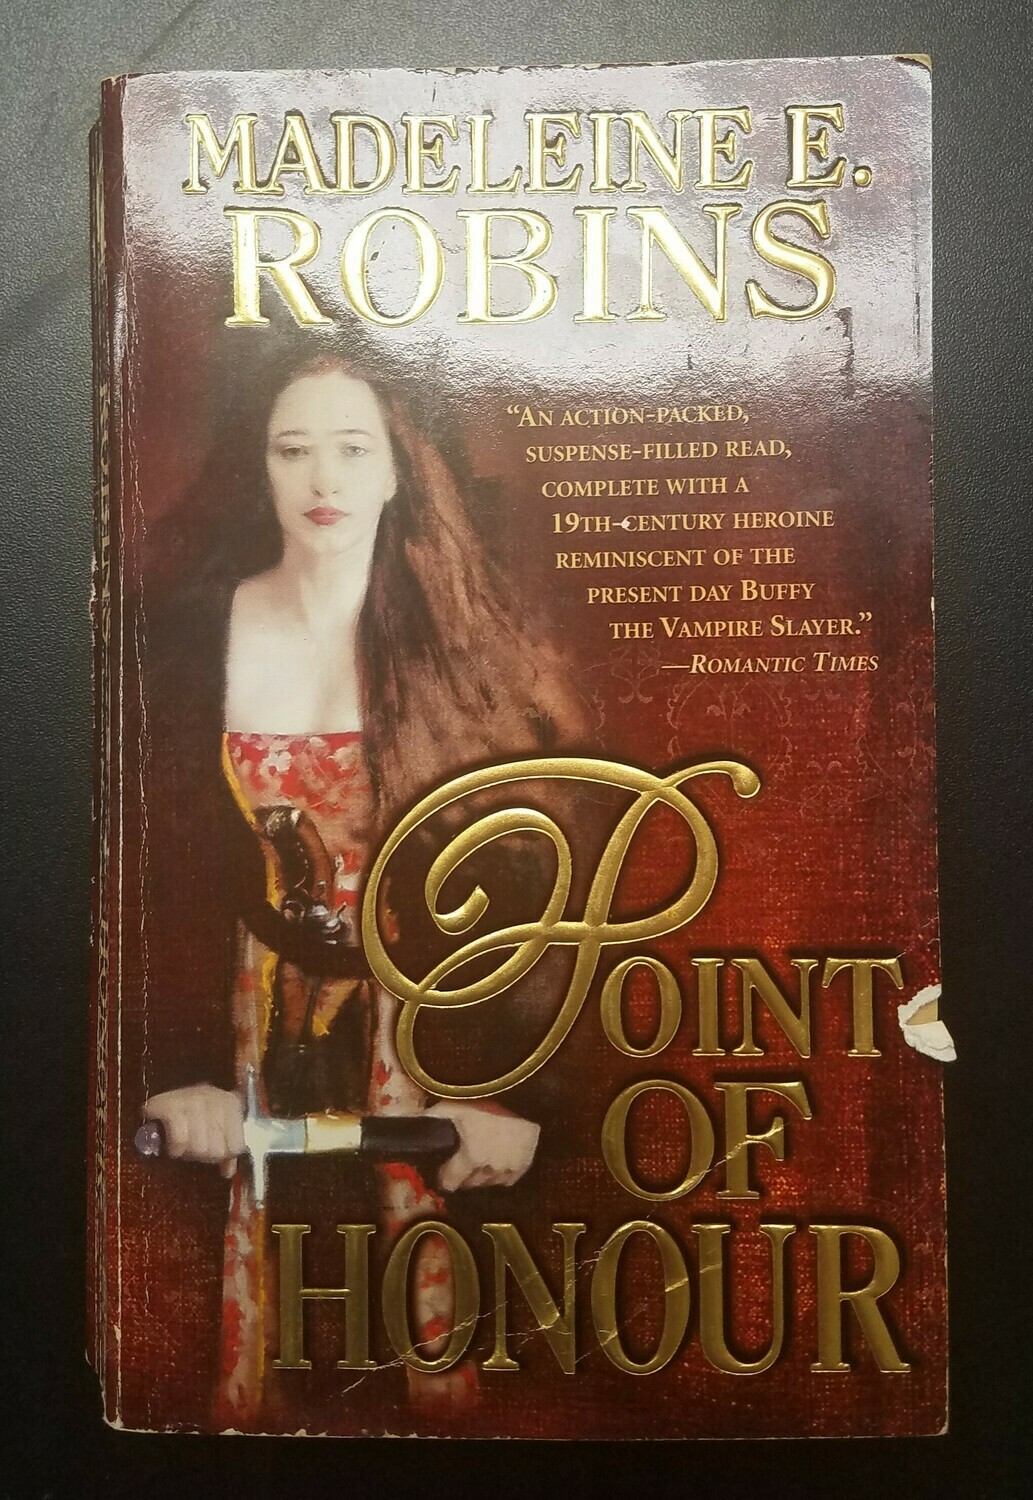 Point of Honour by Madeleine E. Robins